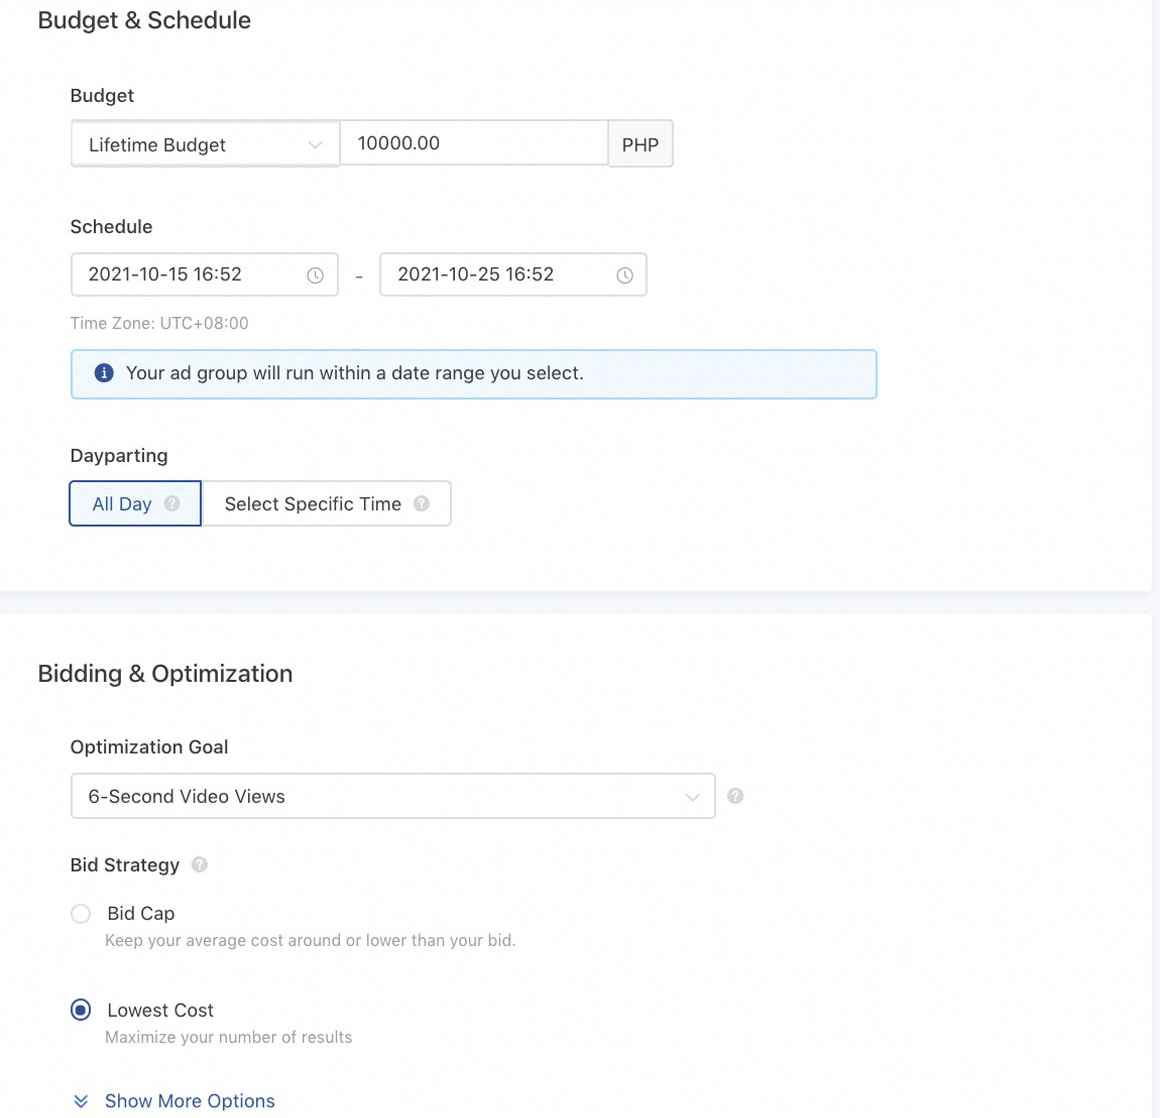 Example of Tiktok Budget, Schedule, and Bidding Setting